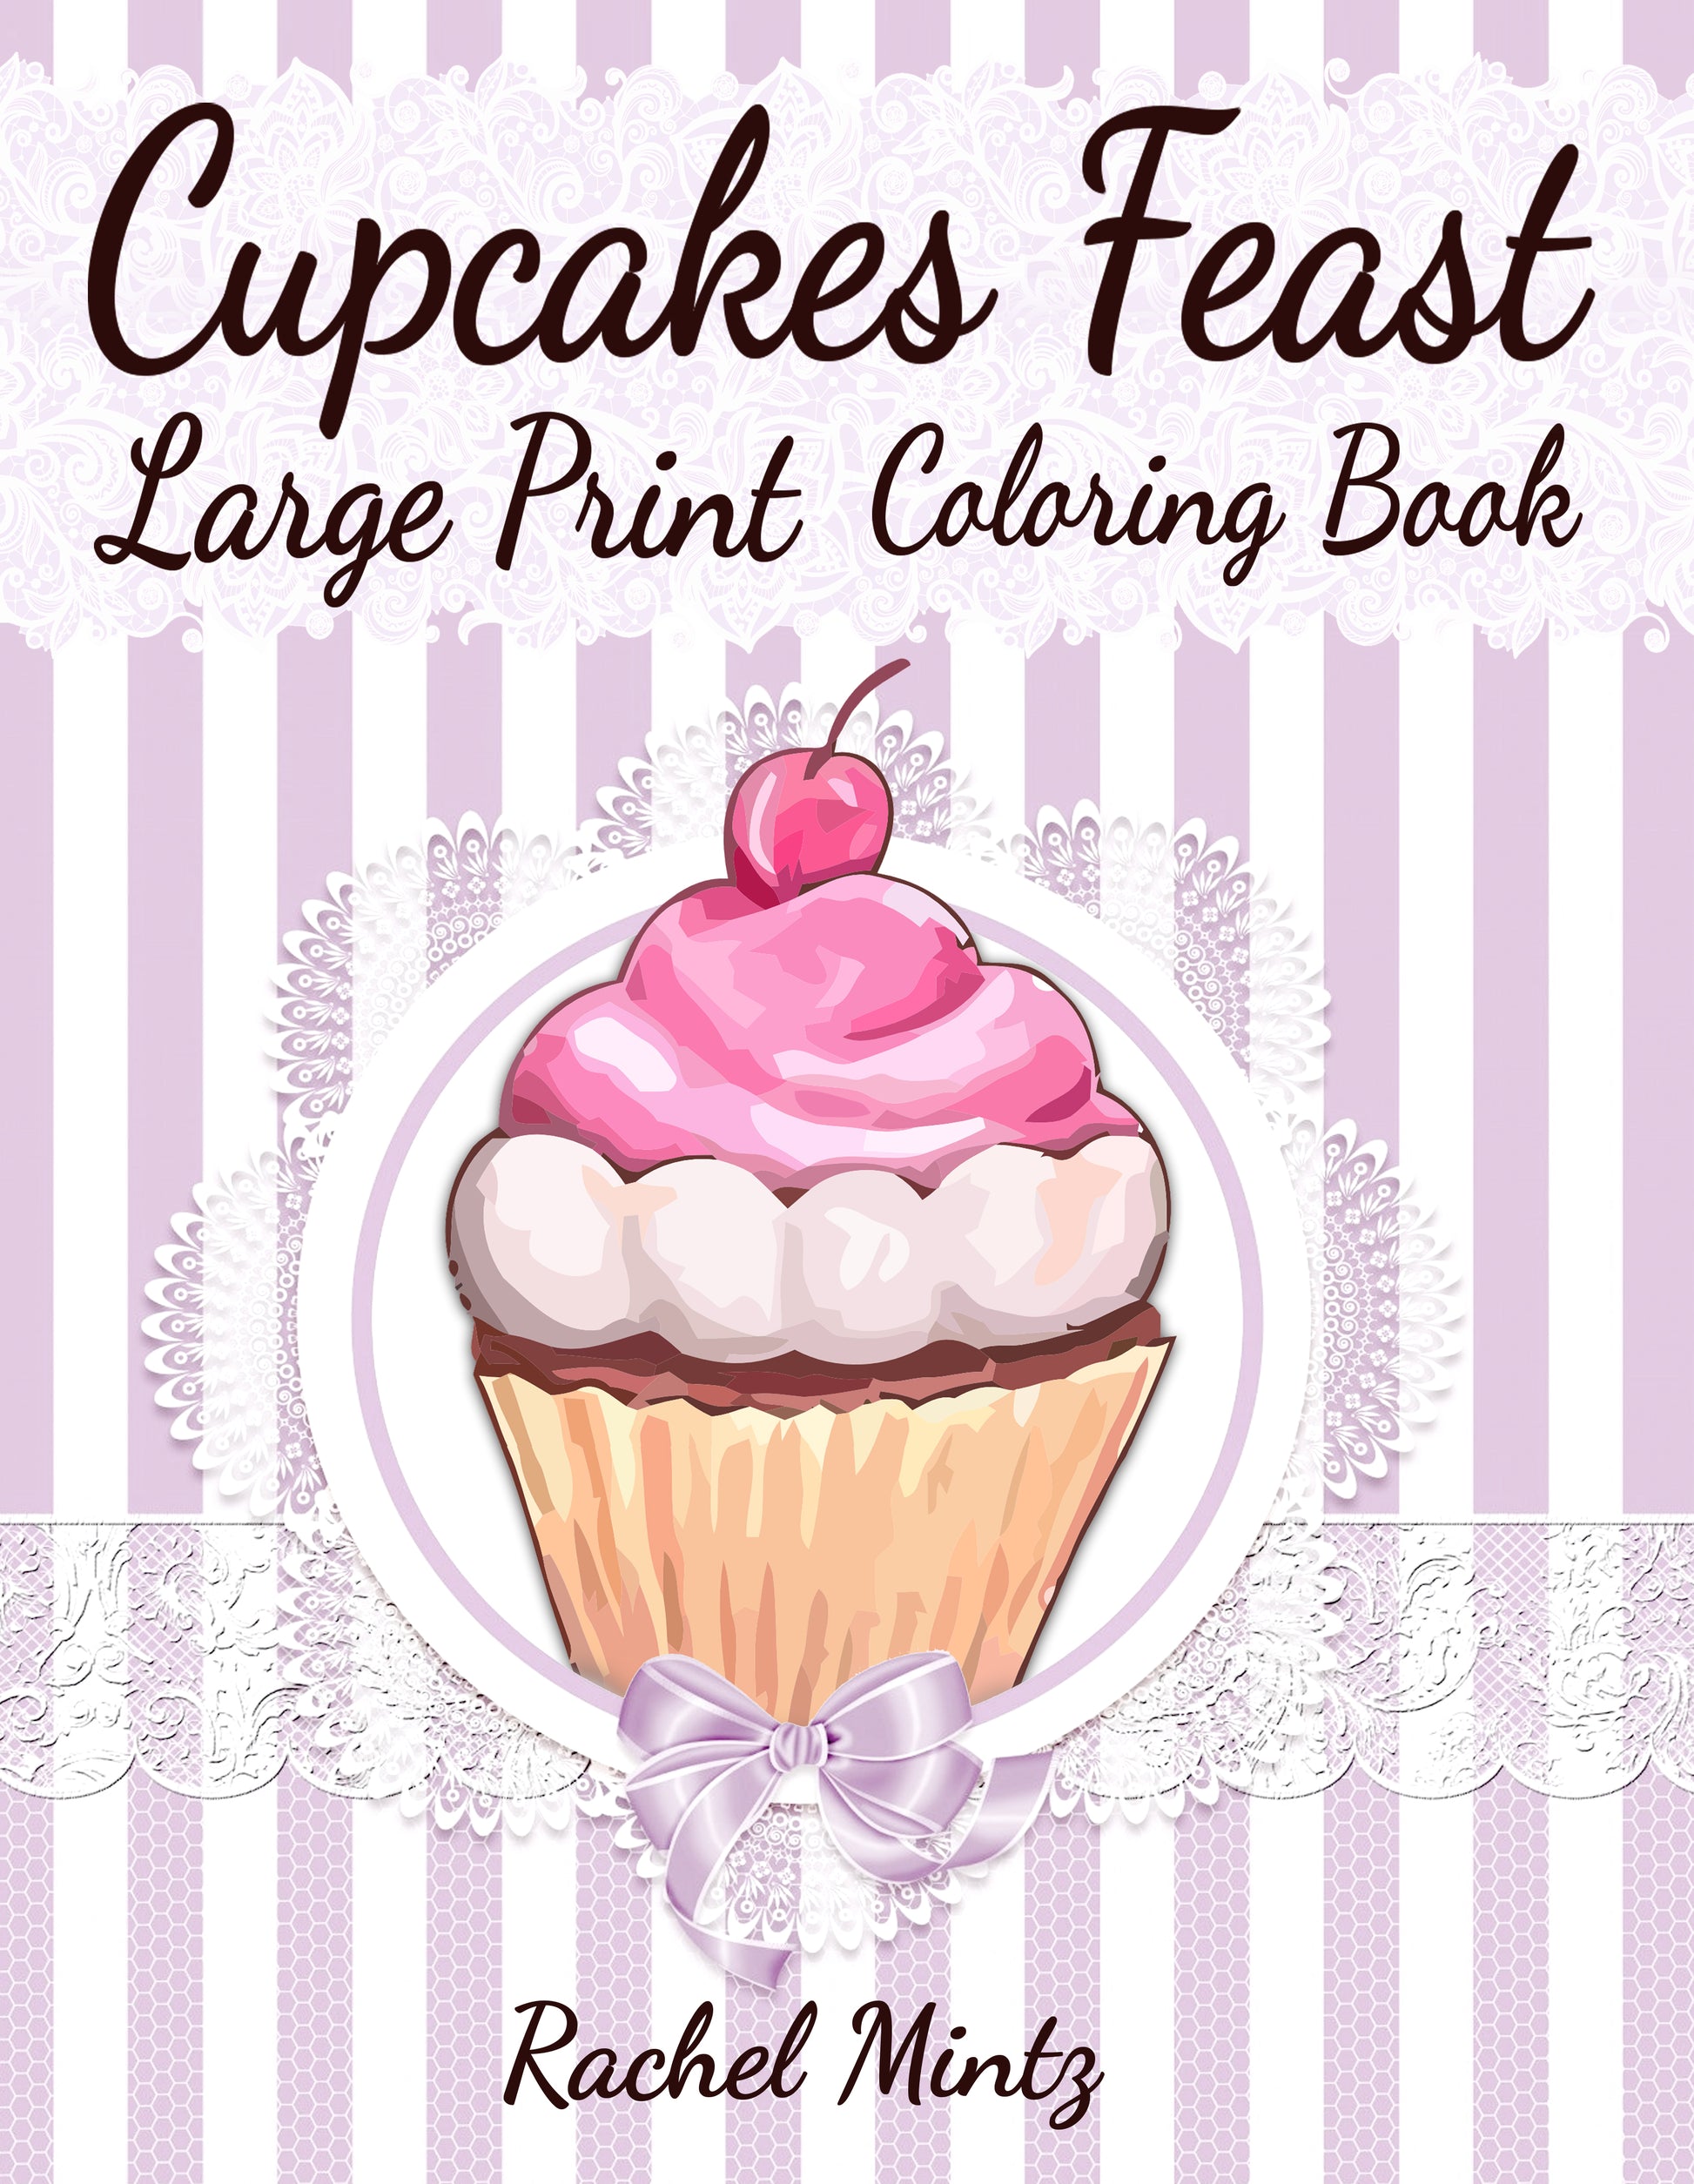 Cupcakes Feast - Large Print Coloring Book For Seniors or Visually Impaired Rachel Mintz